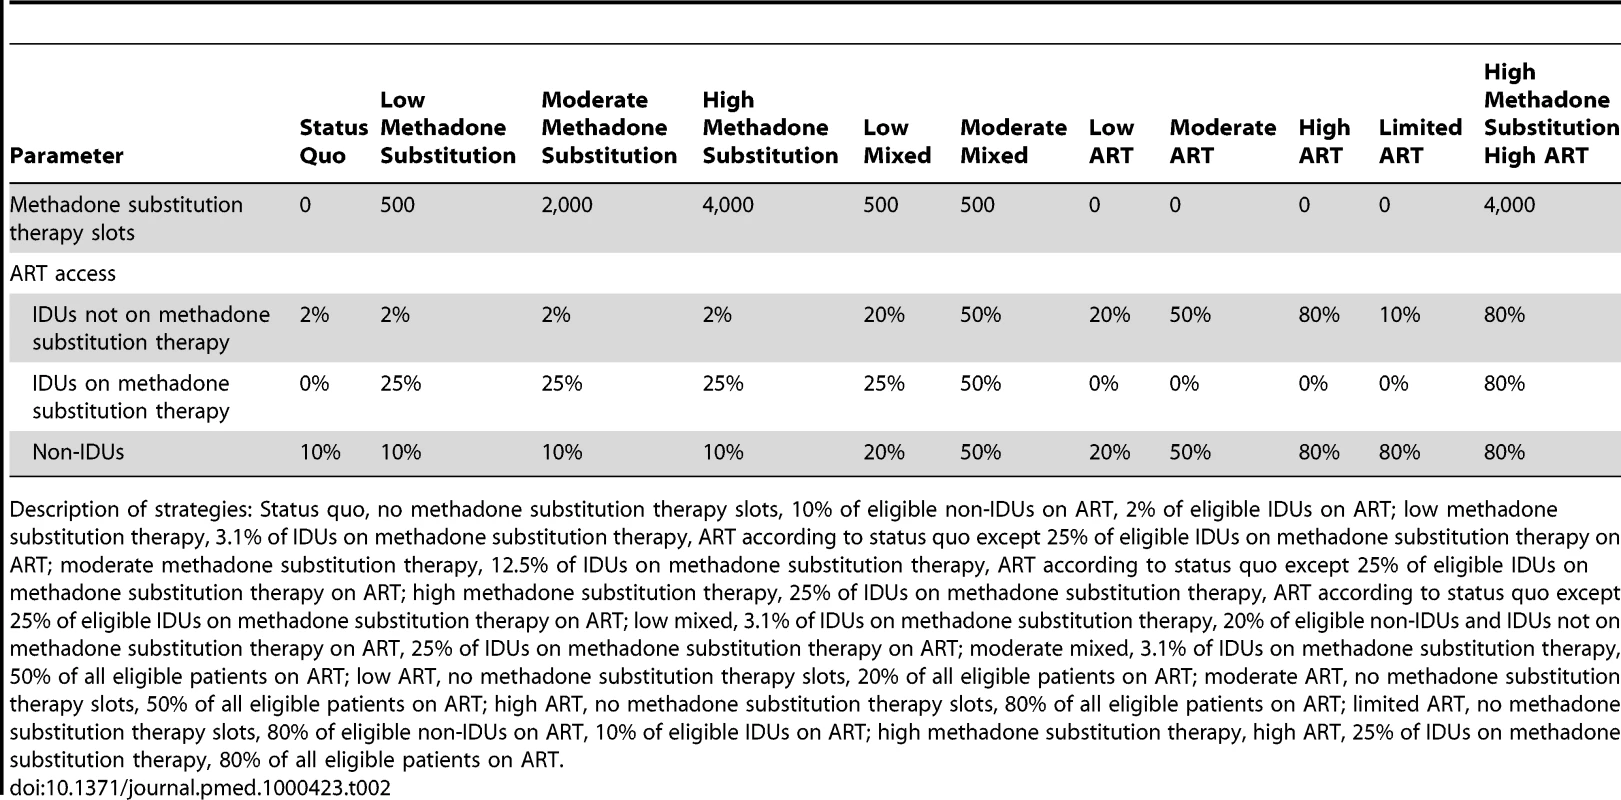 Key parameters (methadone substitution therapy slots and ART access by population) for strategies considered.